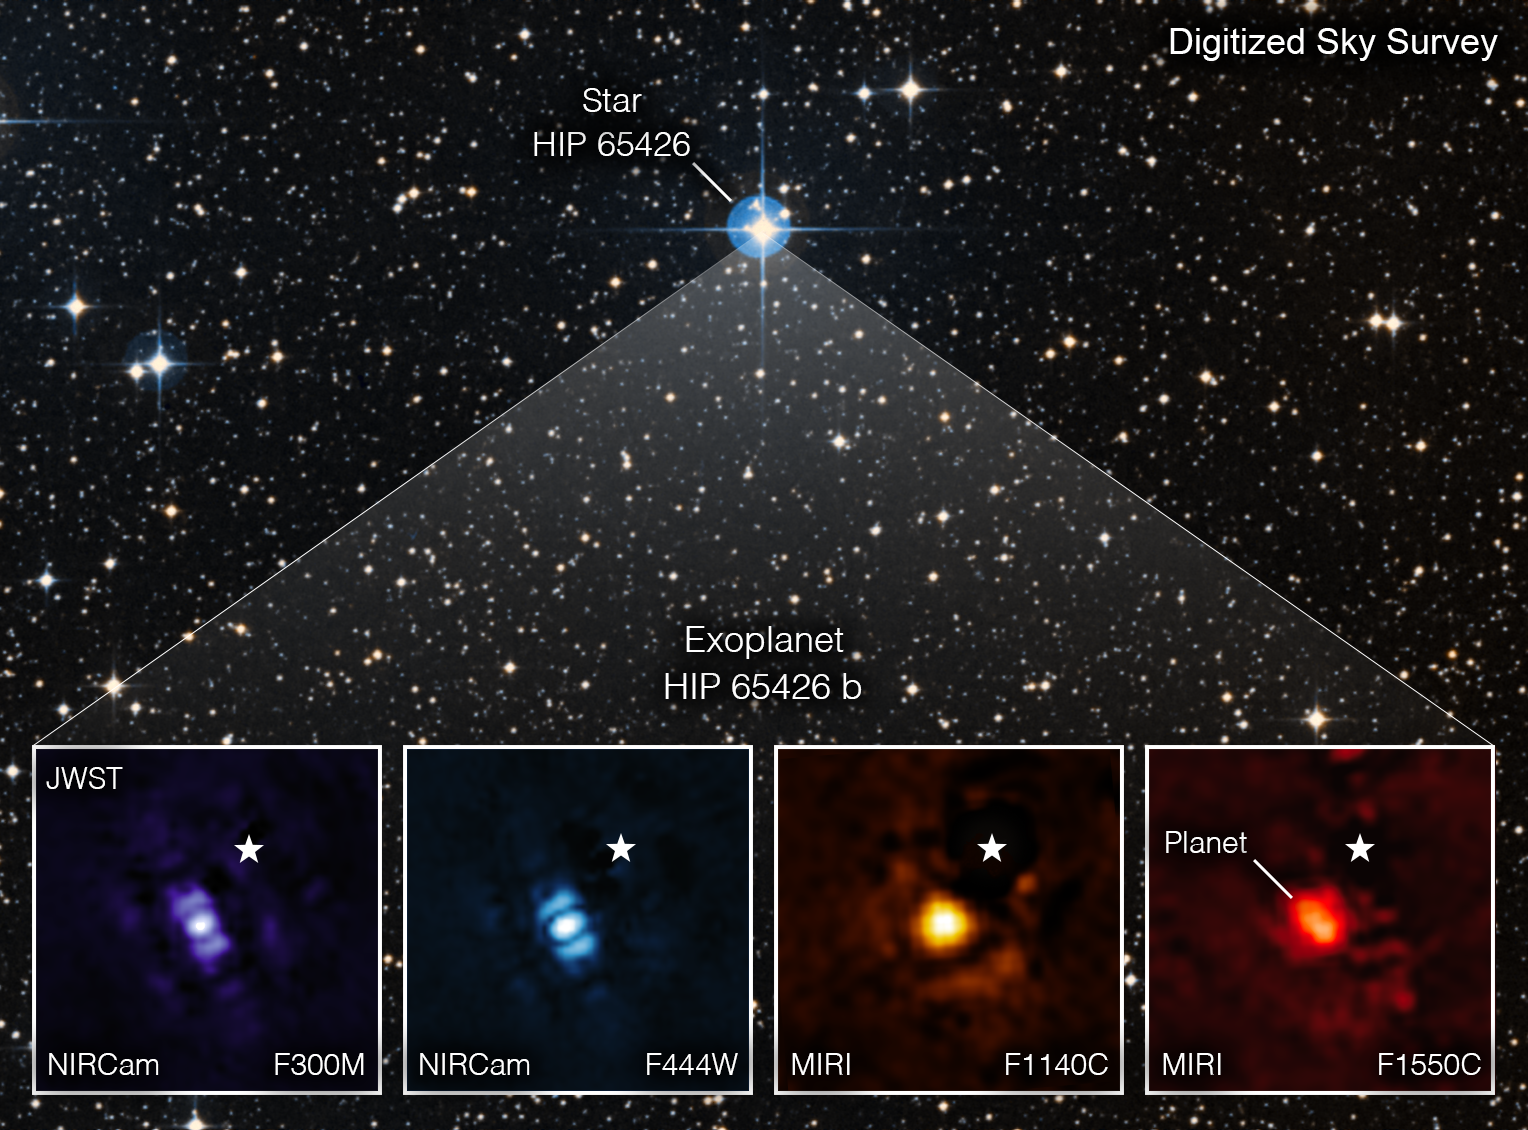 This image shows the exoplanet HIP 65426 b in different bands of infrared light, as seen from the James Webb Space Telescope: purple shows the NIRCam instrument’s view at 3.00 micrometers, blue shows the NIRCam instrument’s view at 4.44 micrometers, yellow shows the MIRI instrument’s view at 11.4 micrometers, and red shows the MIRI instrument’s view at 15.5 micrometers.